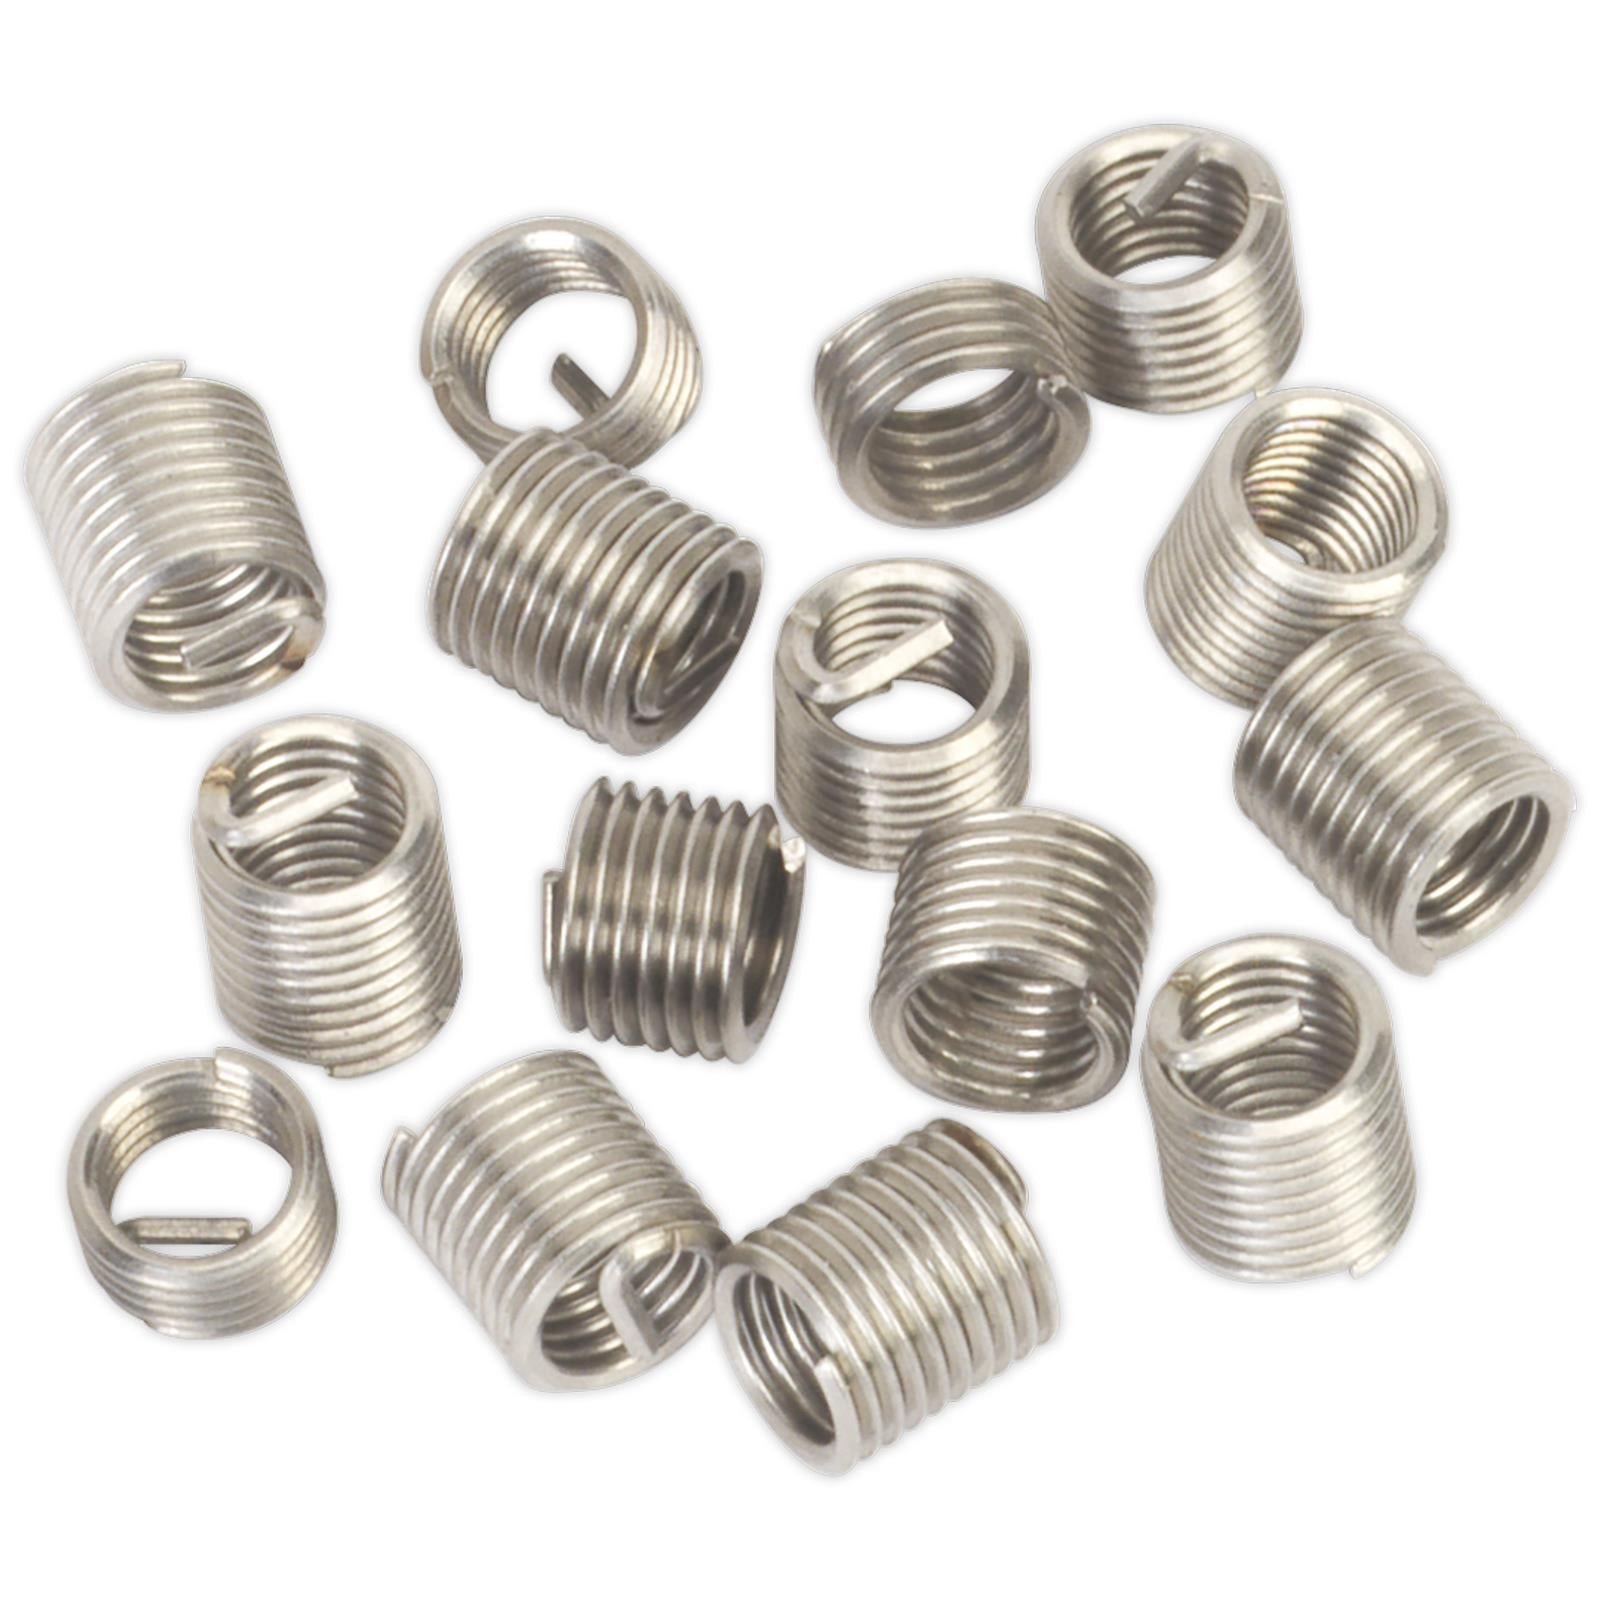 Sealey Thread Insert M6 x 1mm for TRM6 Threaded Inserts Helicoil 15 Pack